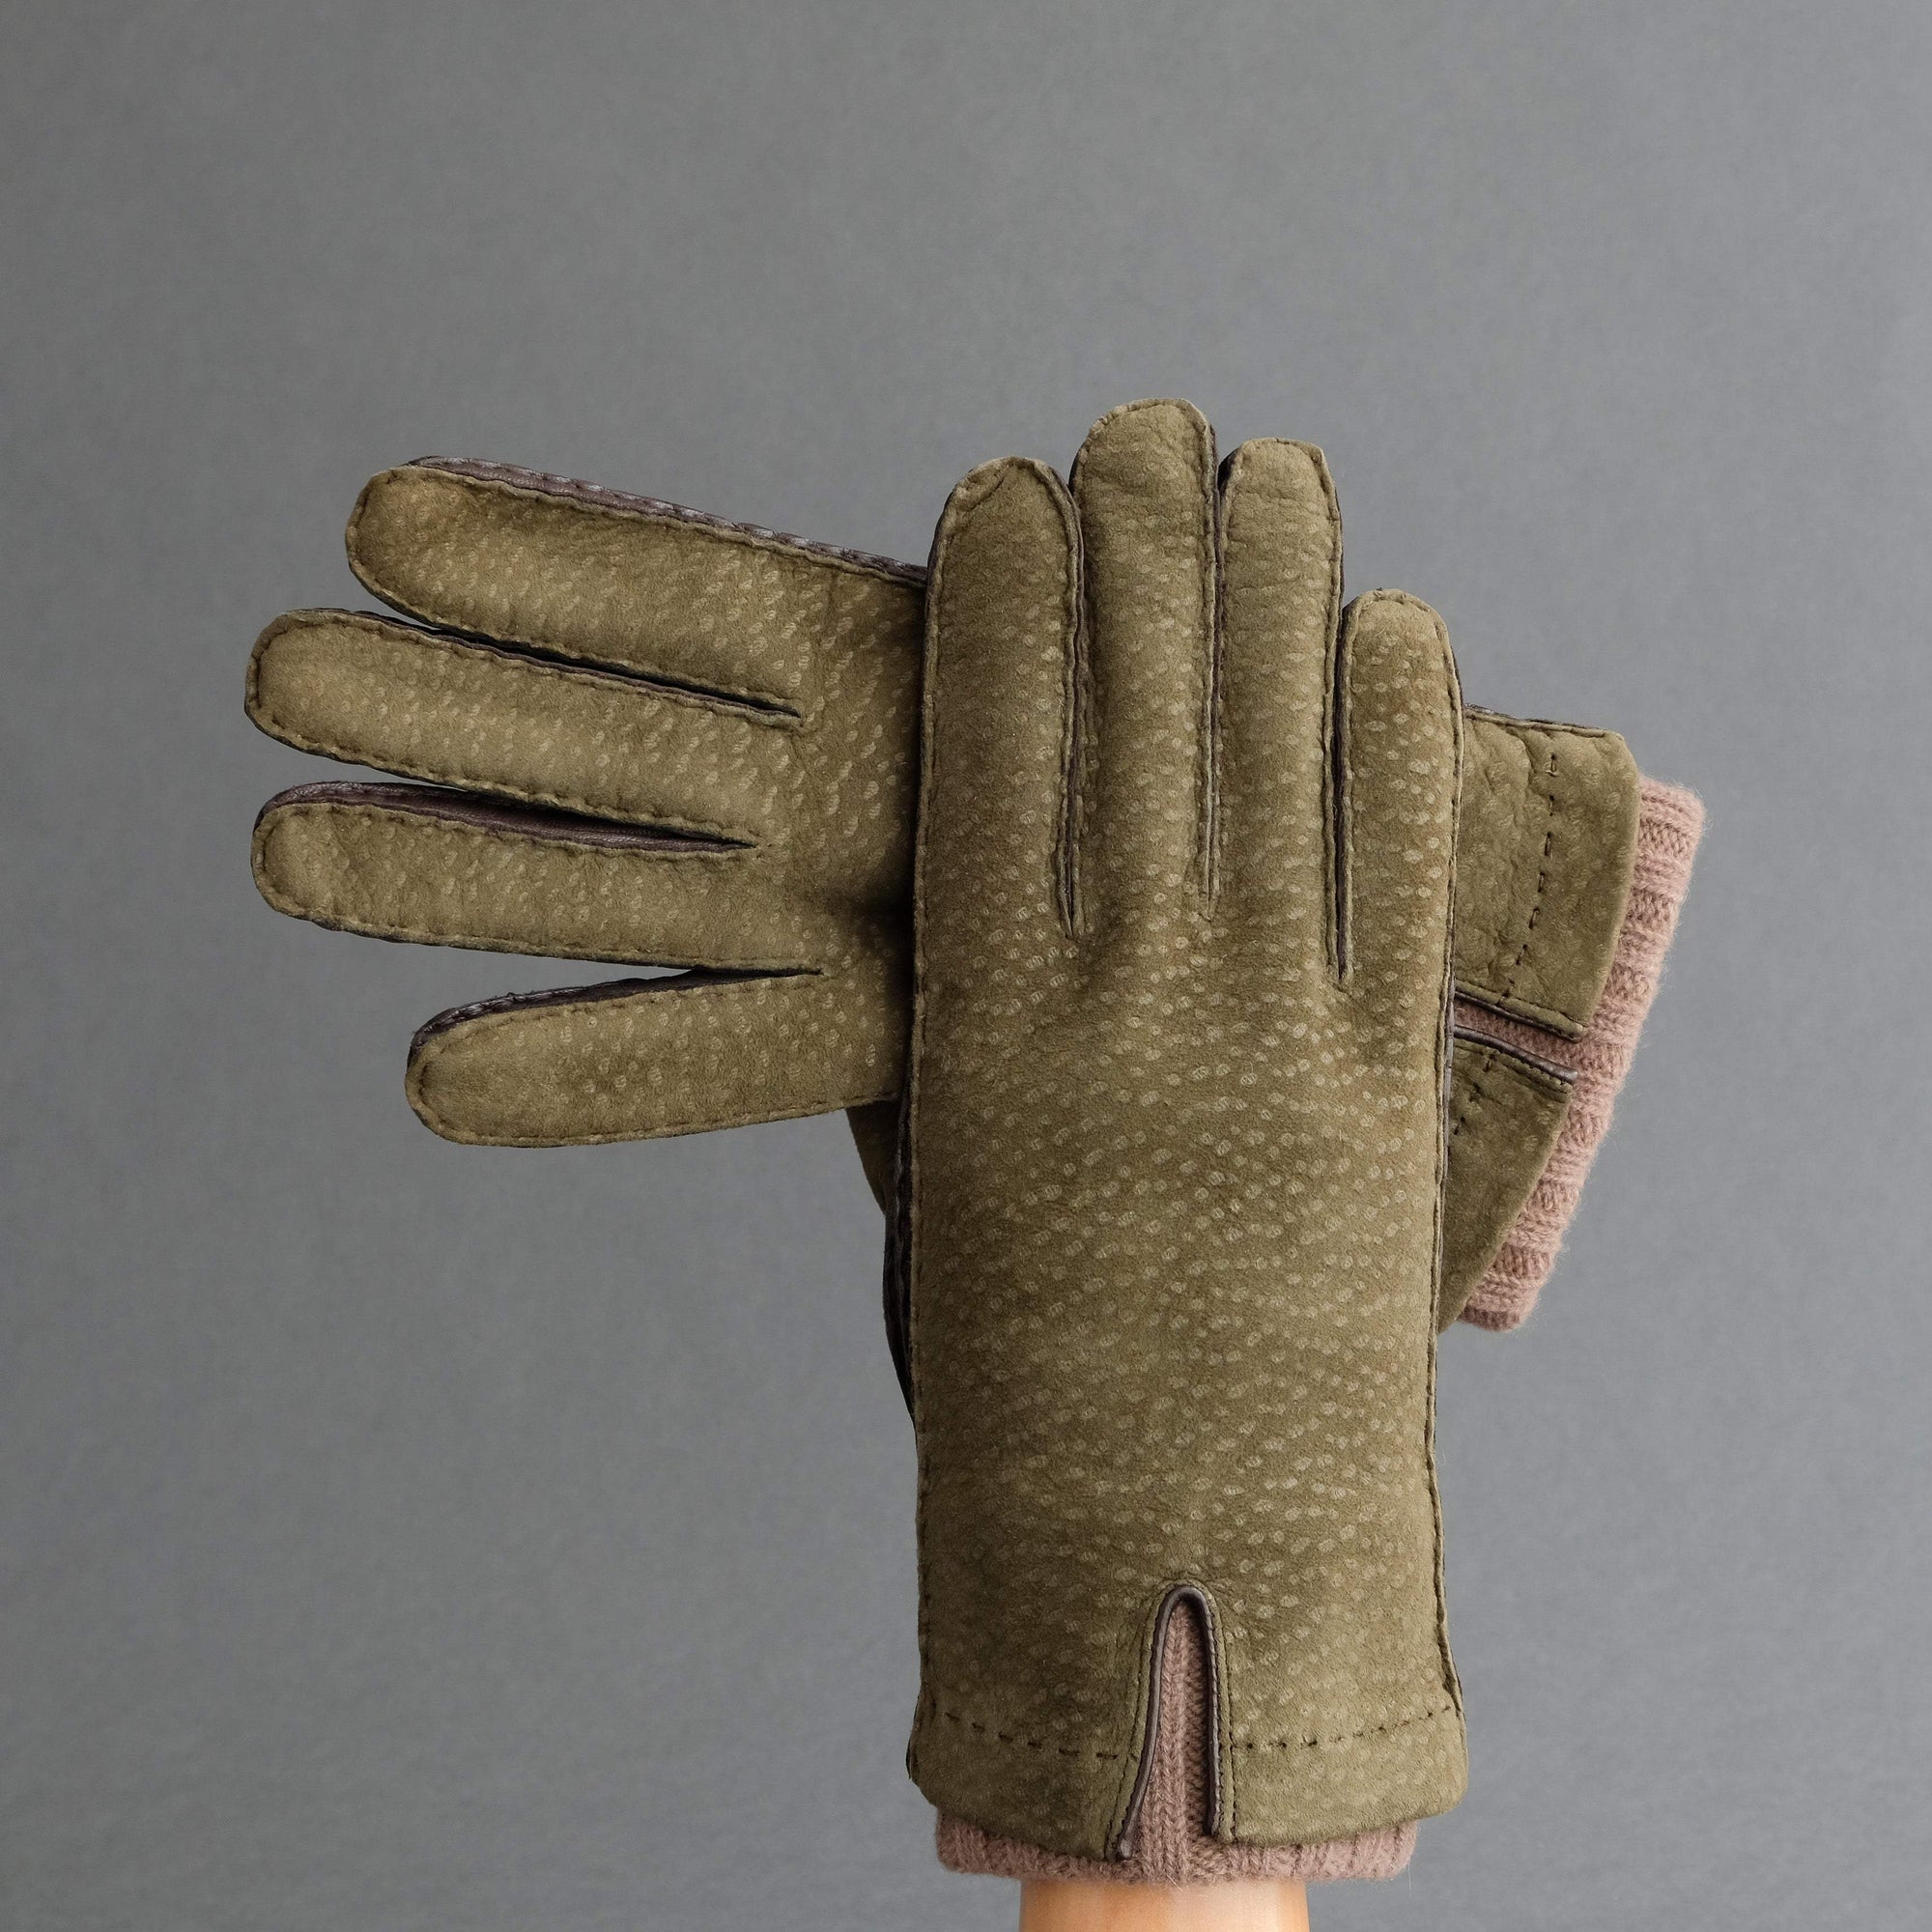 Gentlemen's Gloves from Carpincho and Nappa Leather Lined with Cashmere - TR Handschuhe Wien - Thomas Riemer Handmade Gloves